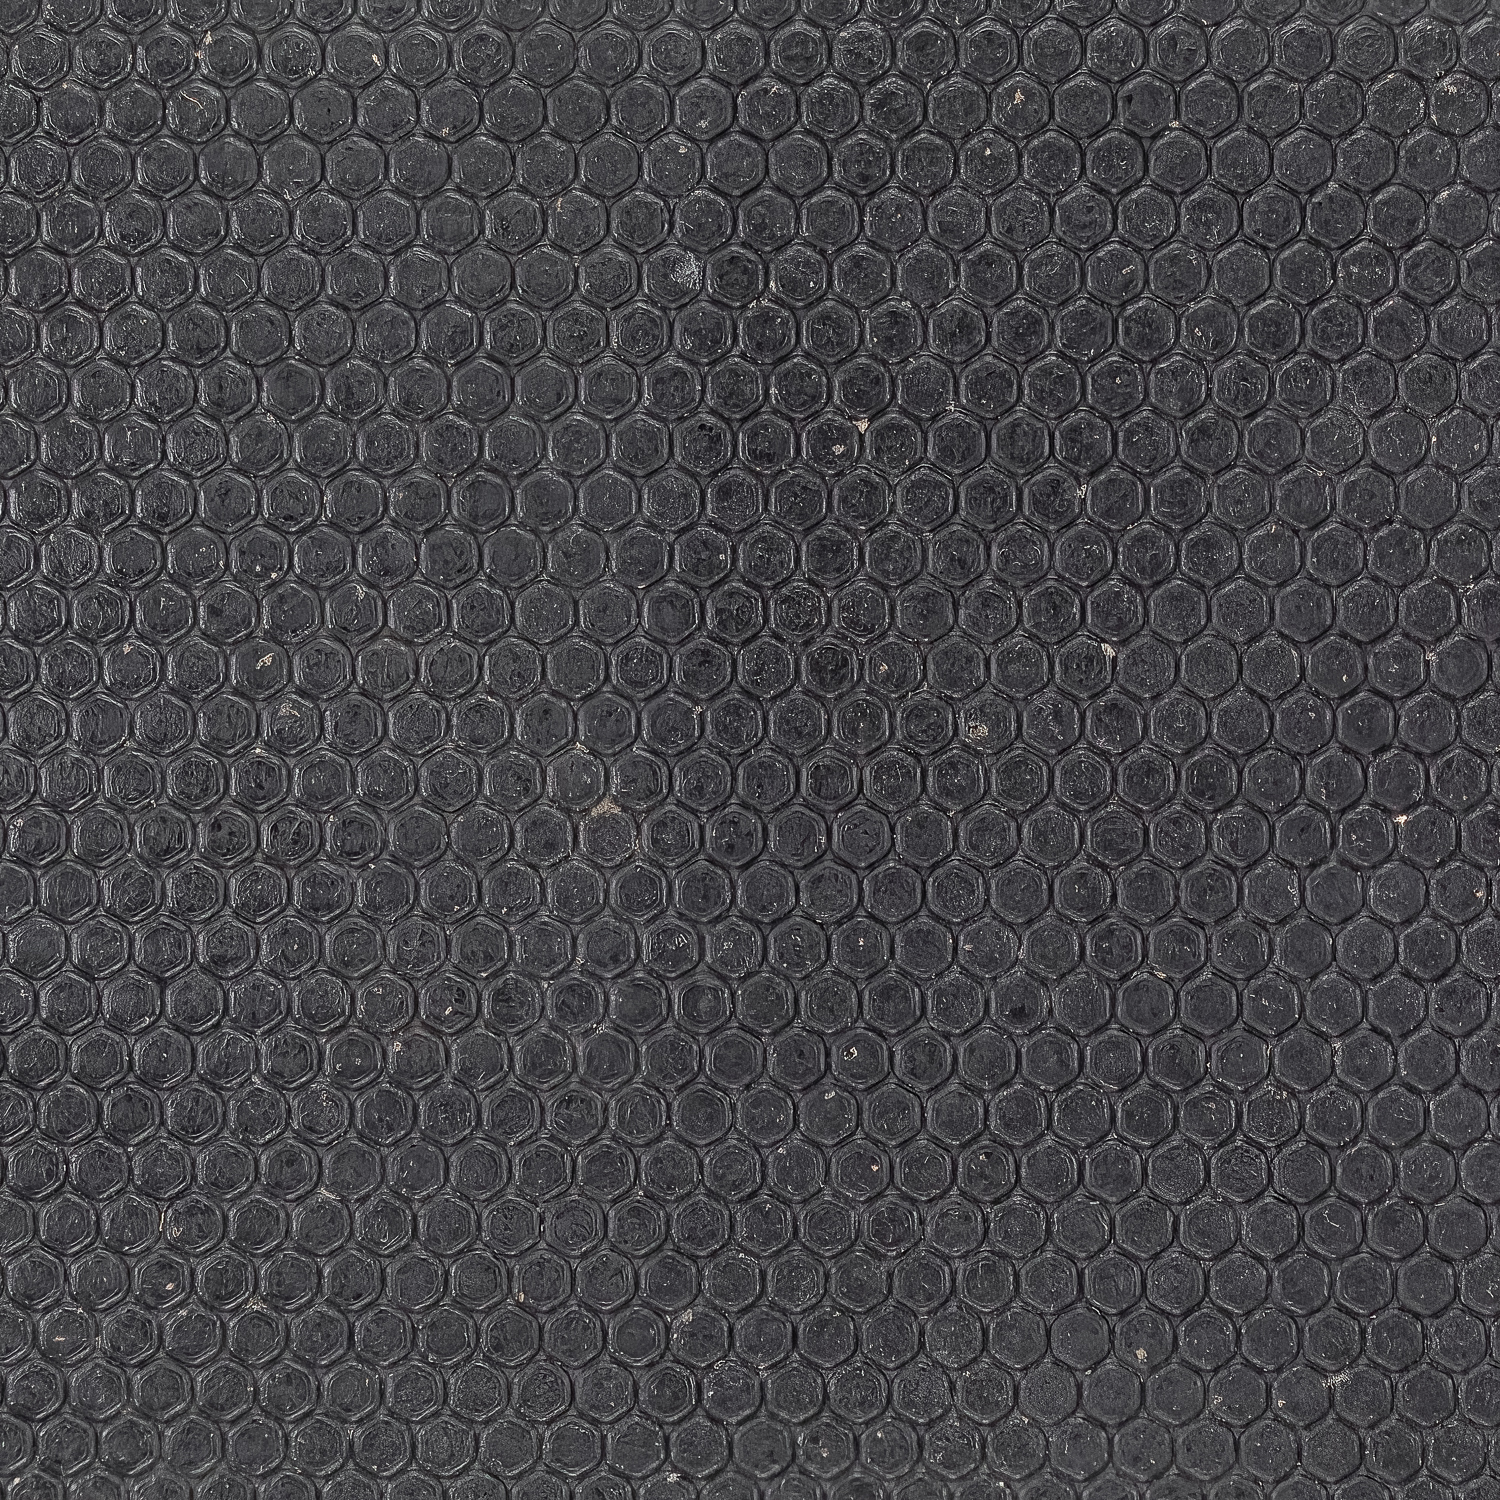 Horse Stall Mat Kit 10x14 Ft x 3/4 In Black swatch.